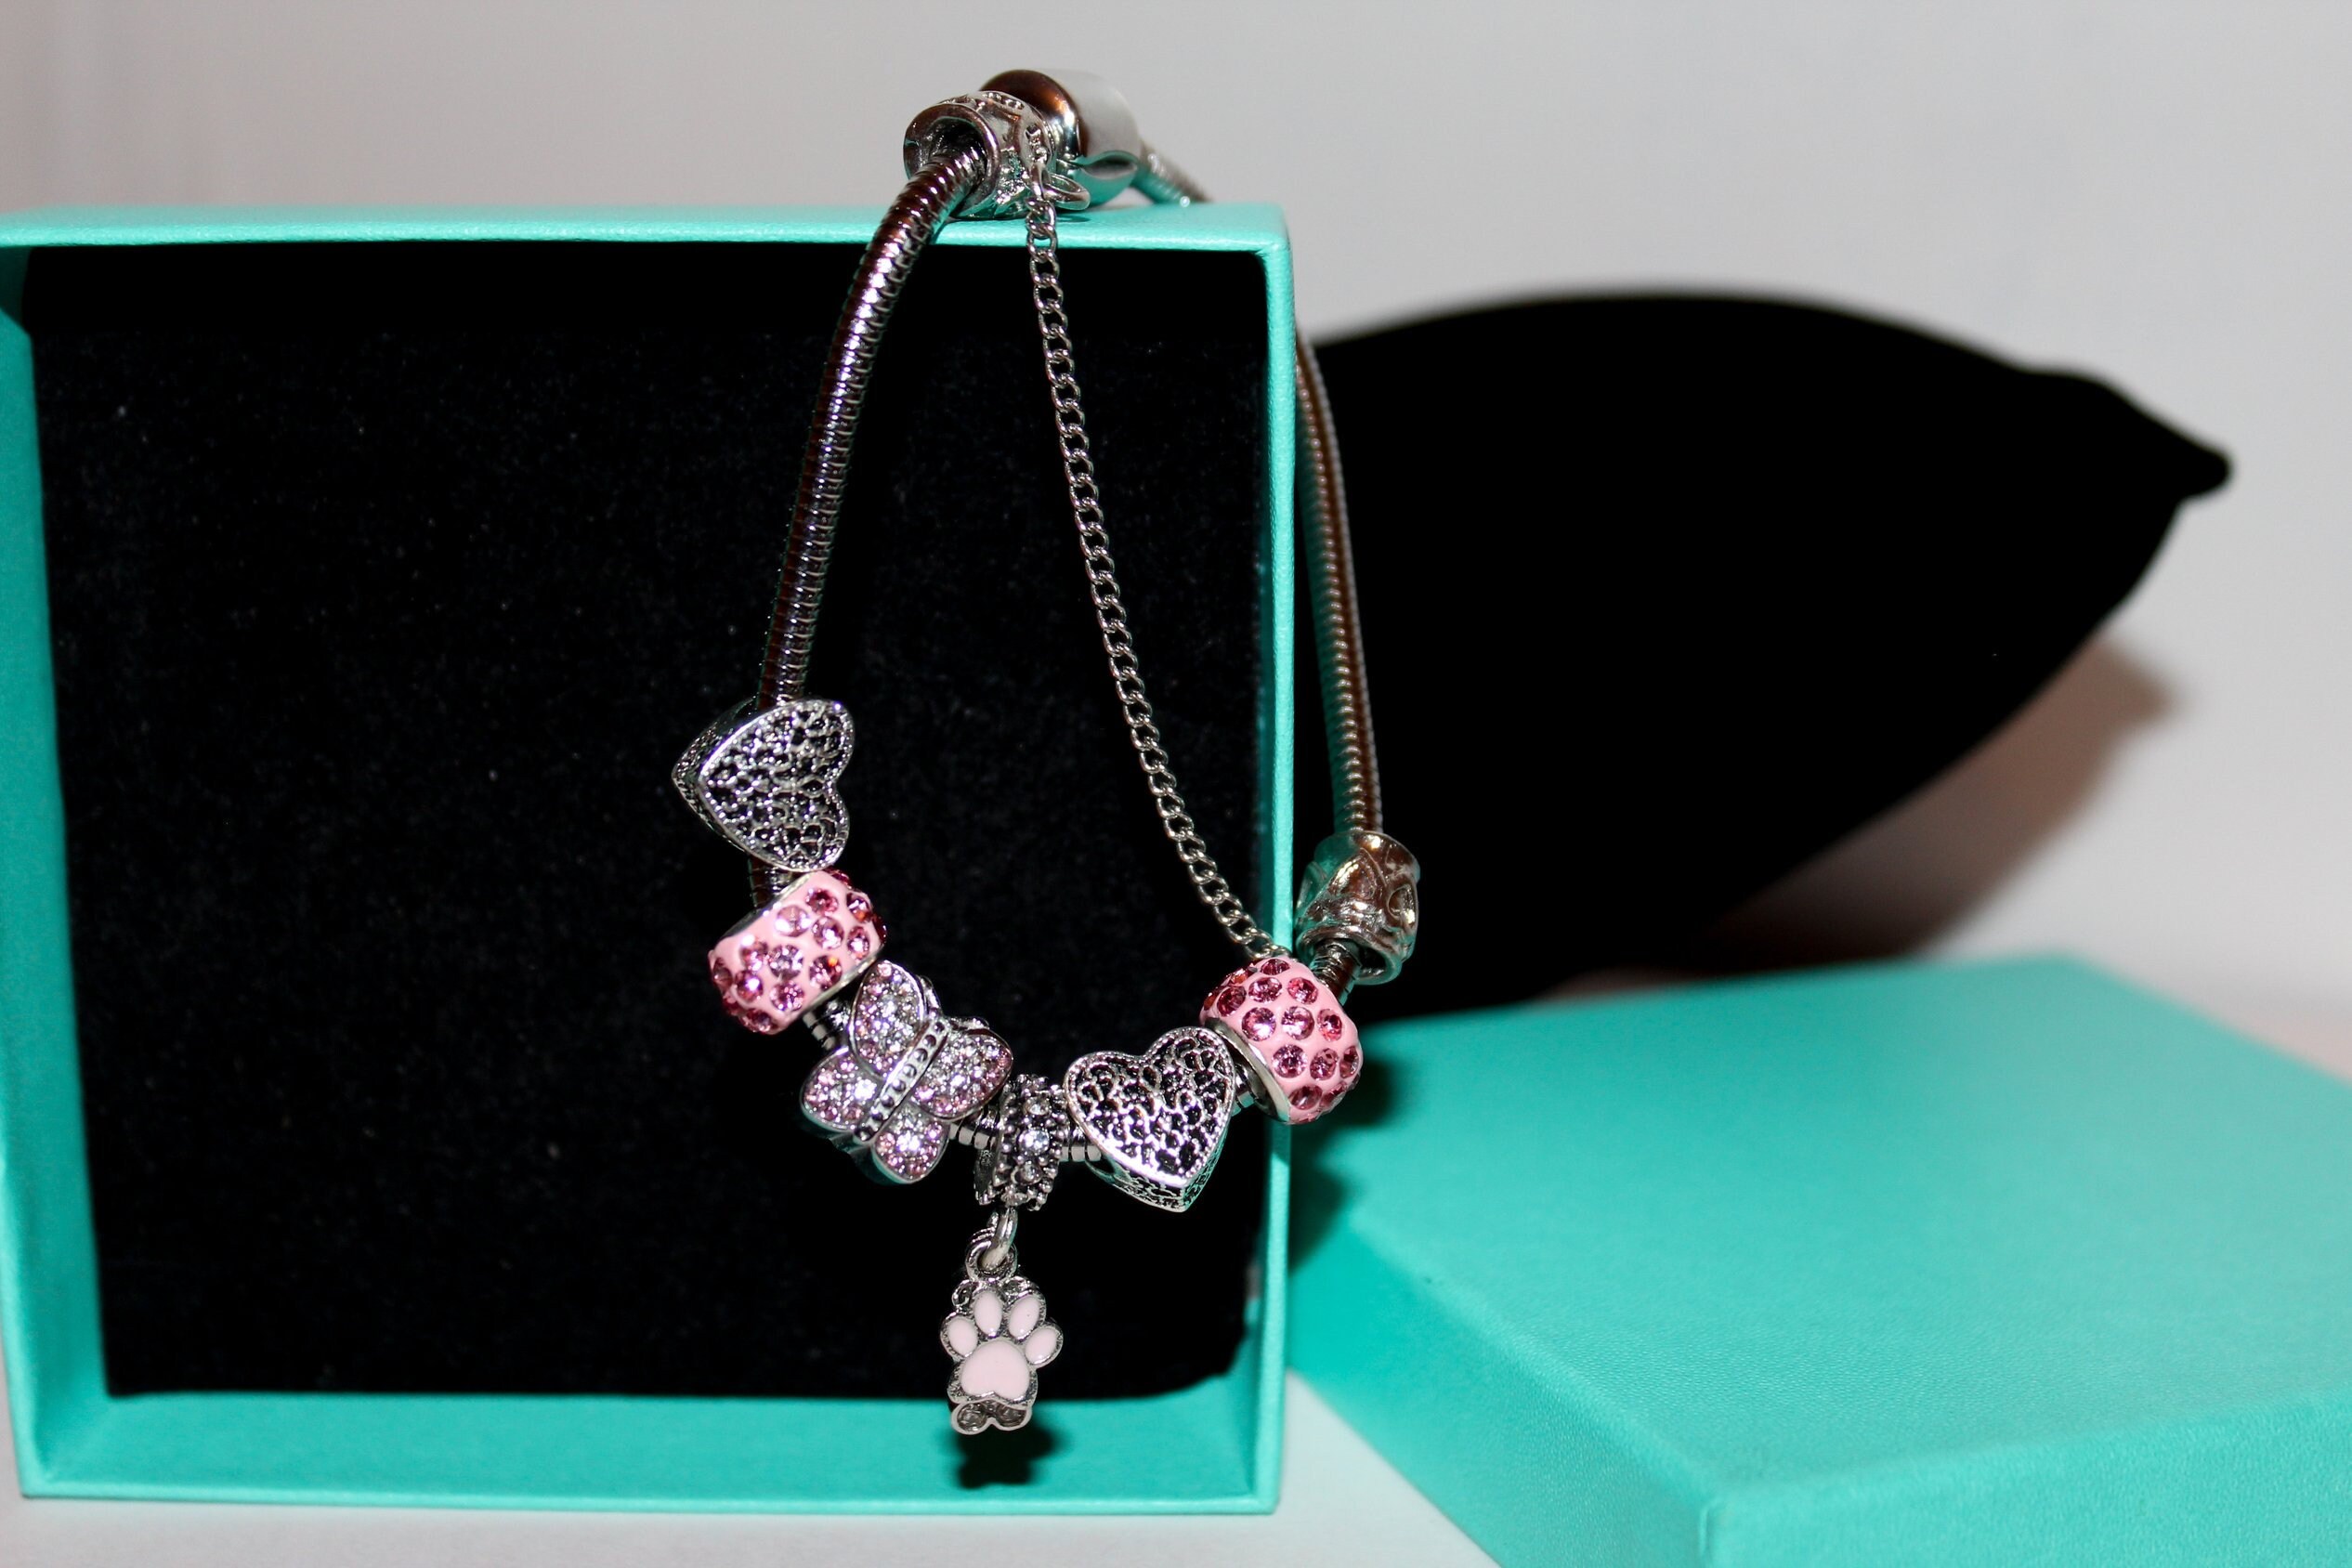 Pandora Style Pink and Silver Charm Bracelet, Complete with Charms, Silver Plated